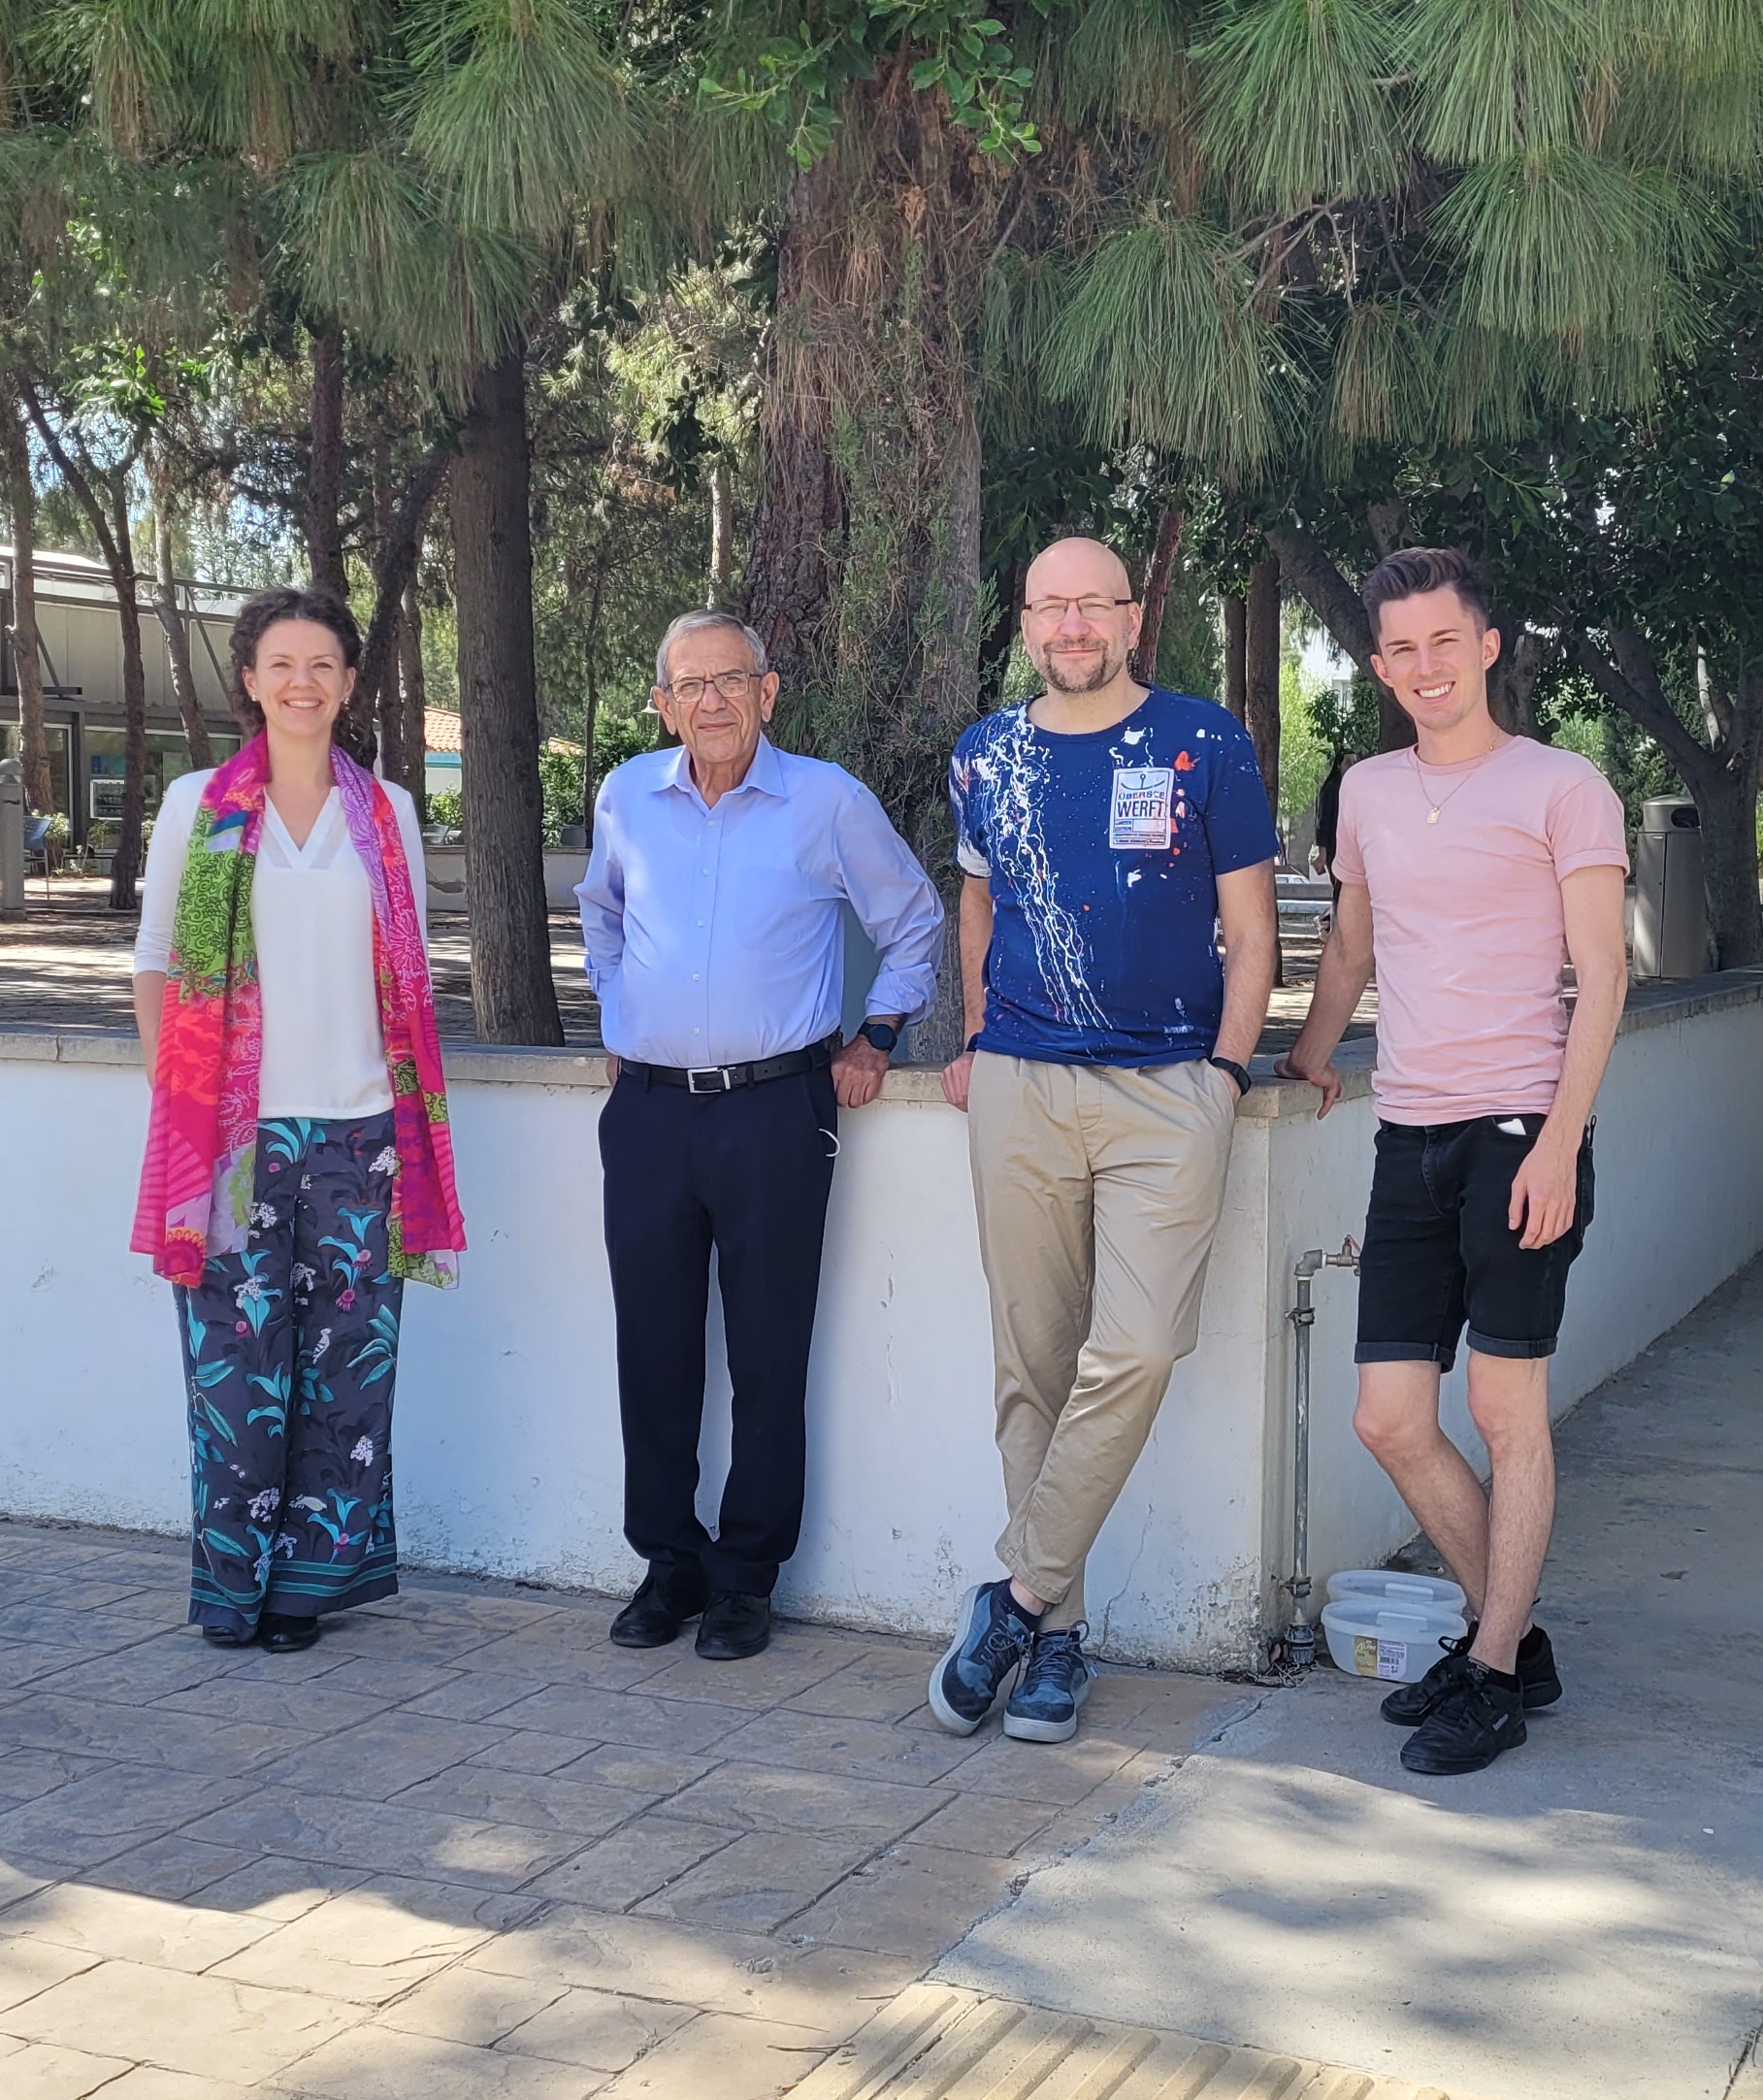 From left to right: Prof. Dr. Maike Schindler, Prof. Dr. Constantinos Christou, Prof. Dr. Achim J. Lilienthal, and Lukas Baumanns. Participants in the meeting, but not pictured, are Prof. Dr. Demetra Pitta-Pantazi and Dr. Eleni Demosthenous.